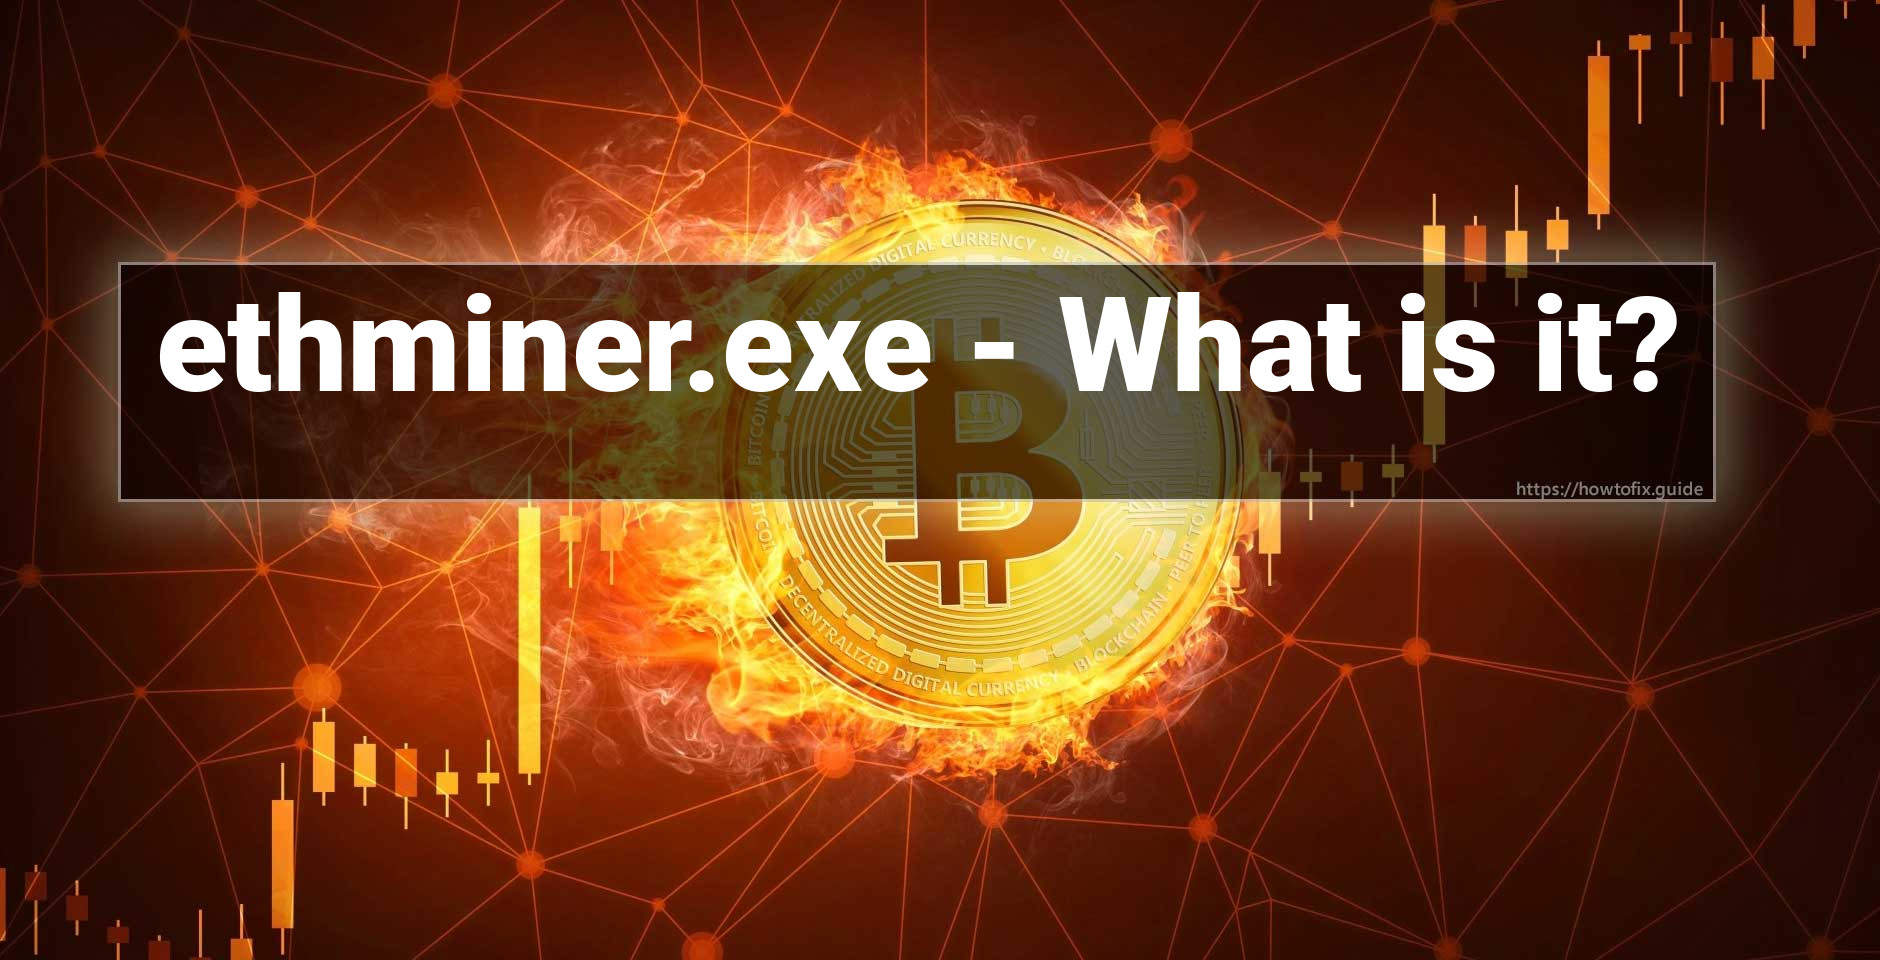 eth miner arguments for the existence